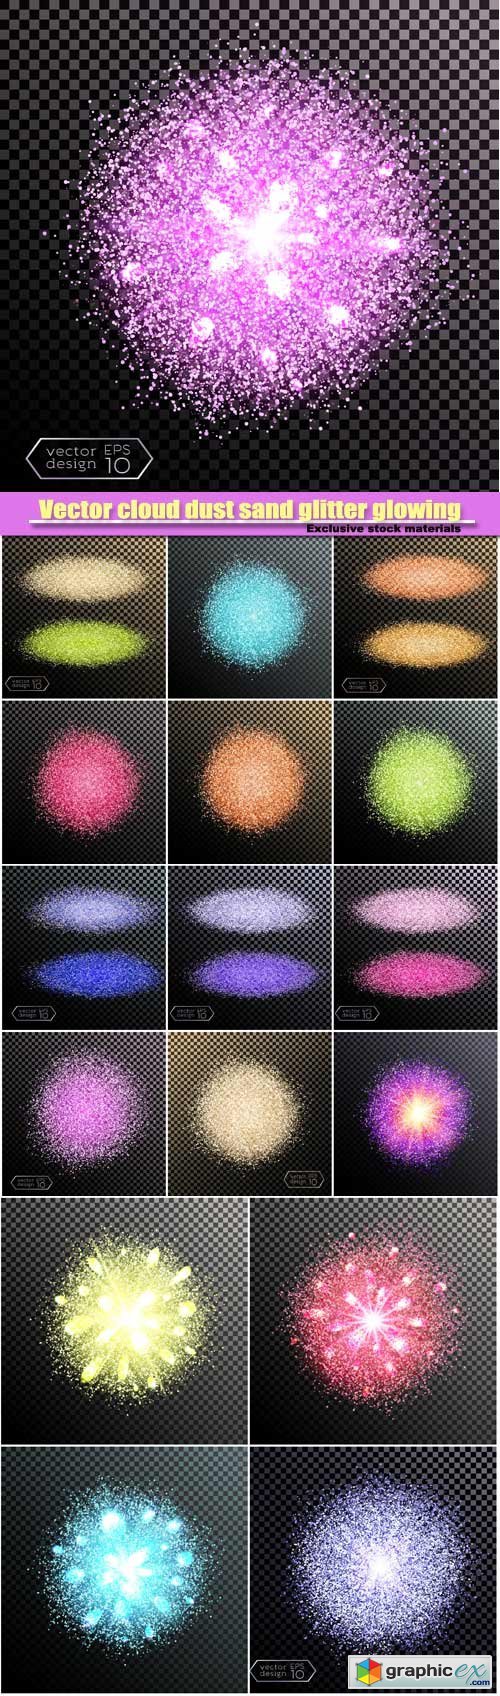 Vector cloud dust sand glitter glowing bright isolated design element